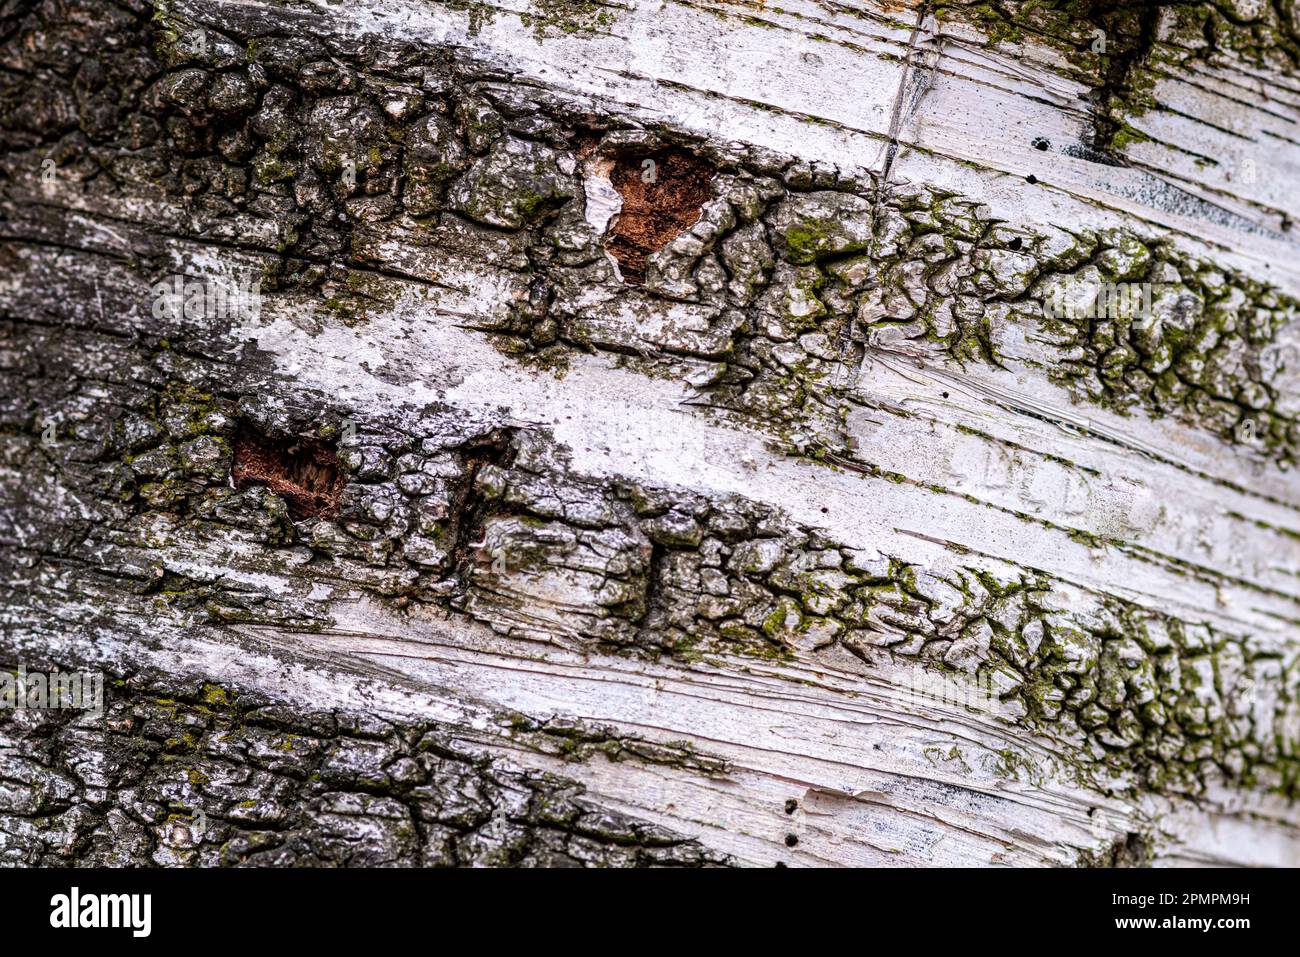 A birch tree trunk covered in moss, with patches of its bark peeling away to reveal wood underneath Stock Photo